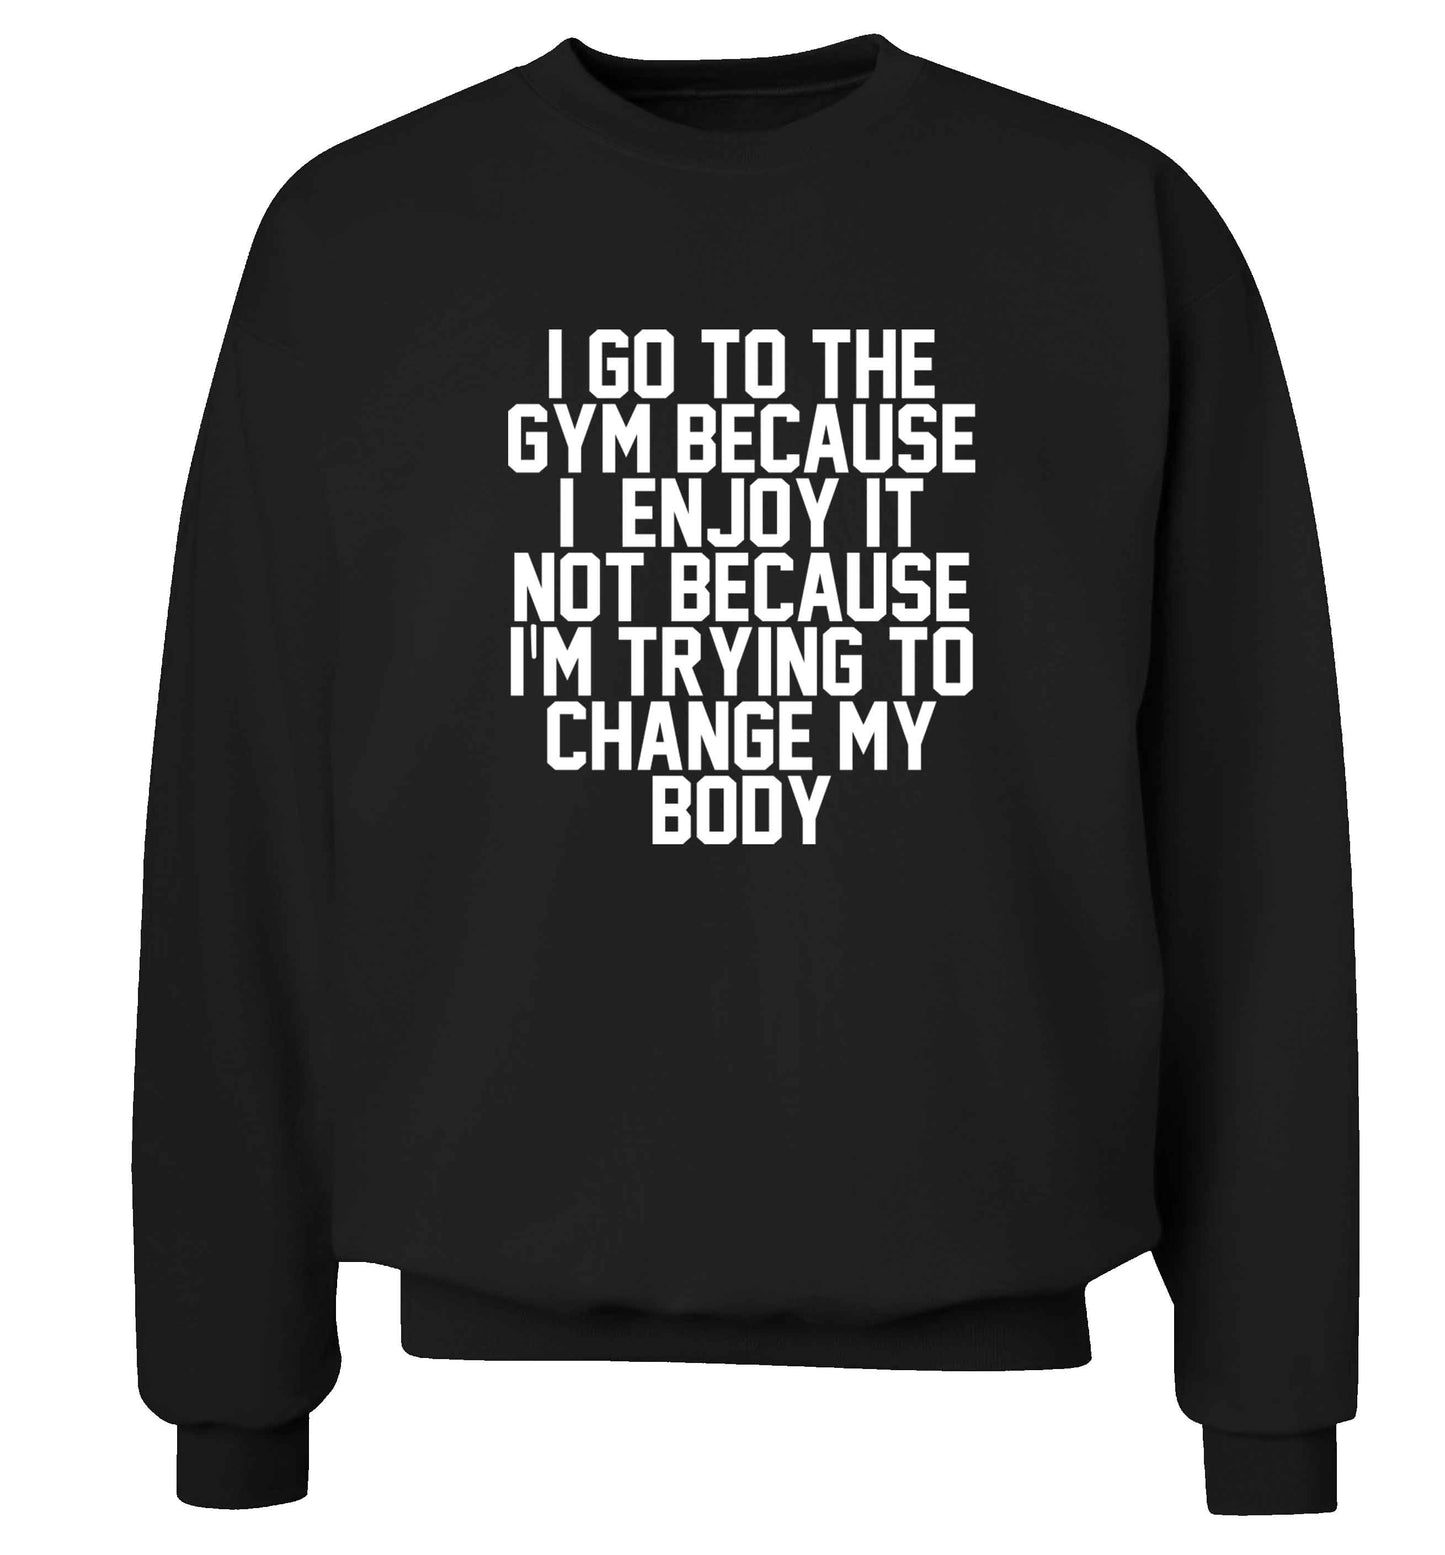 I go to the gym because I enjoy it not because I'm trying to change my body adult's unisex black sweater 2XL